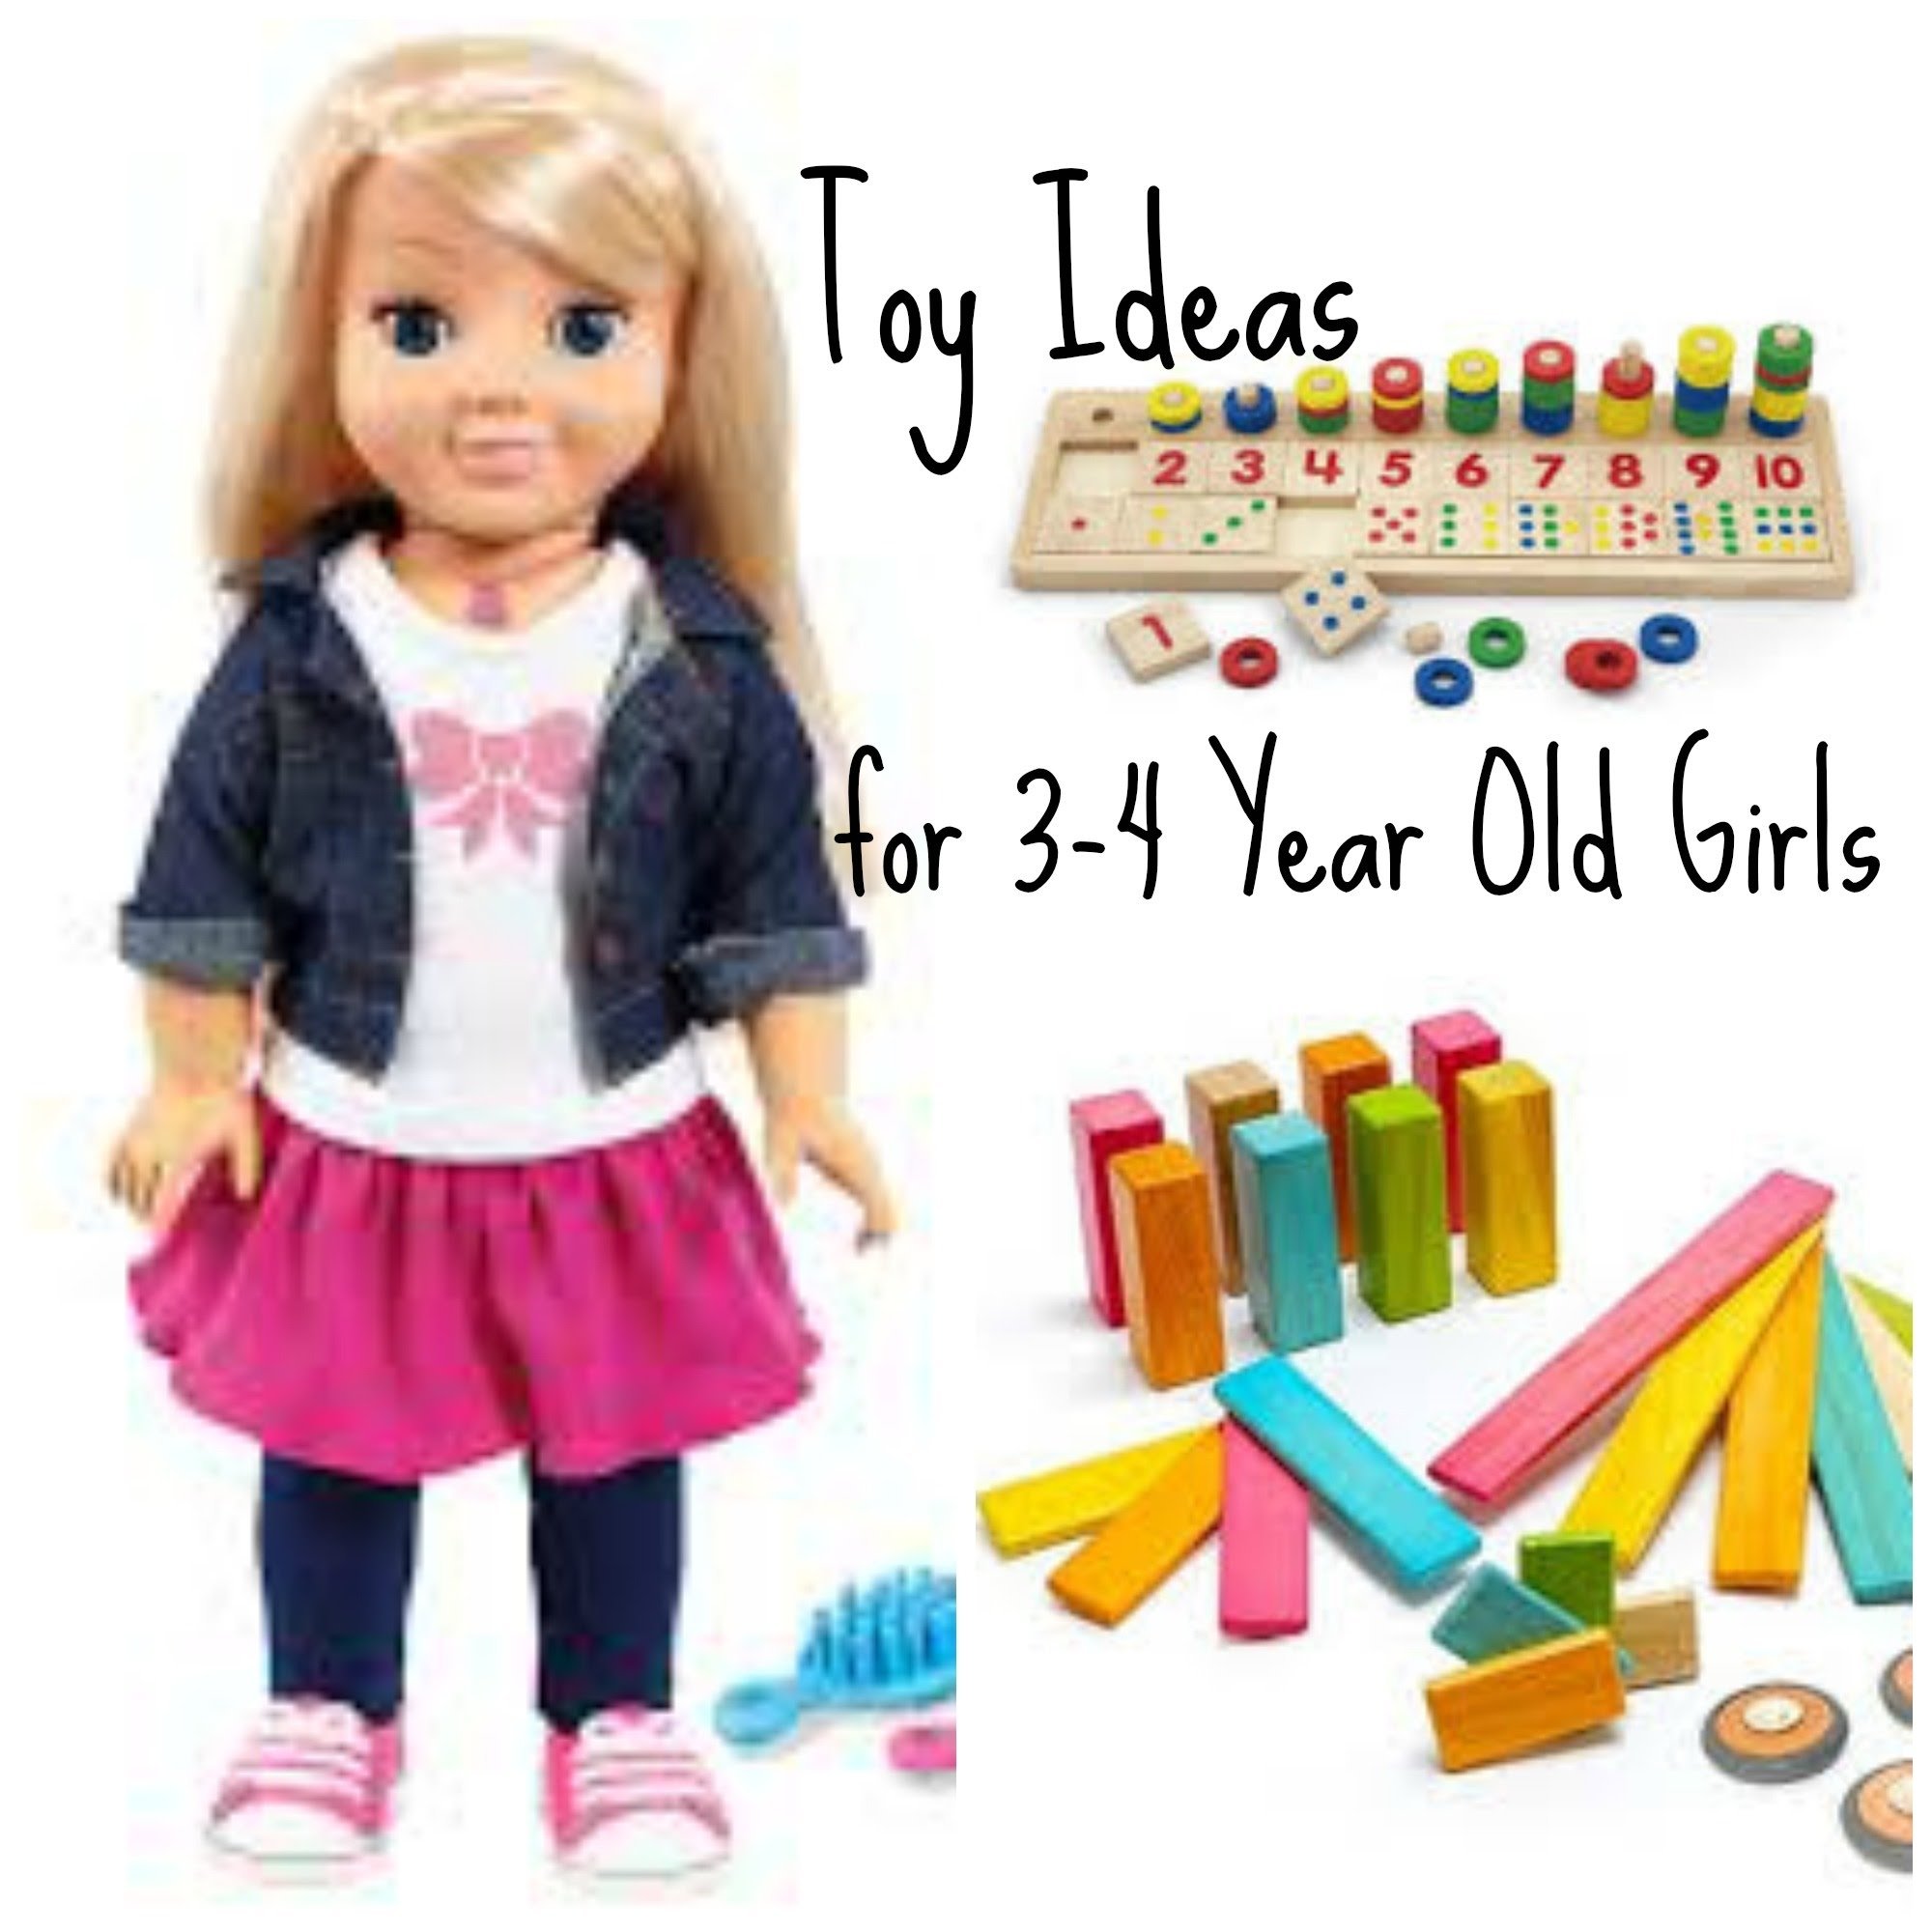 10 Lovely Gift Ideas For 3 Year Old Girls toys 3 4 years old girl all i want for christmas collab youtube 12 2022